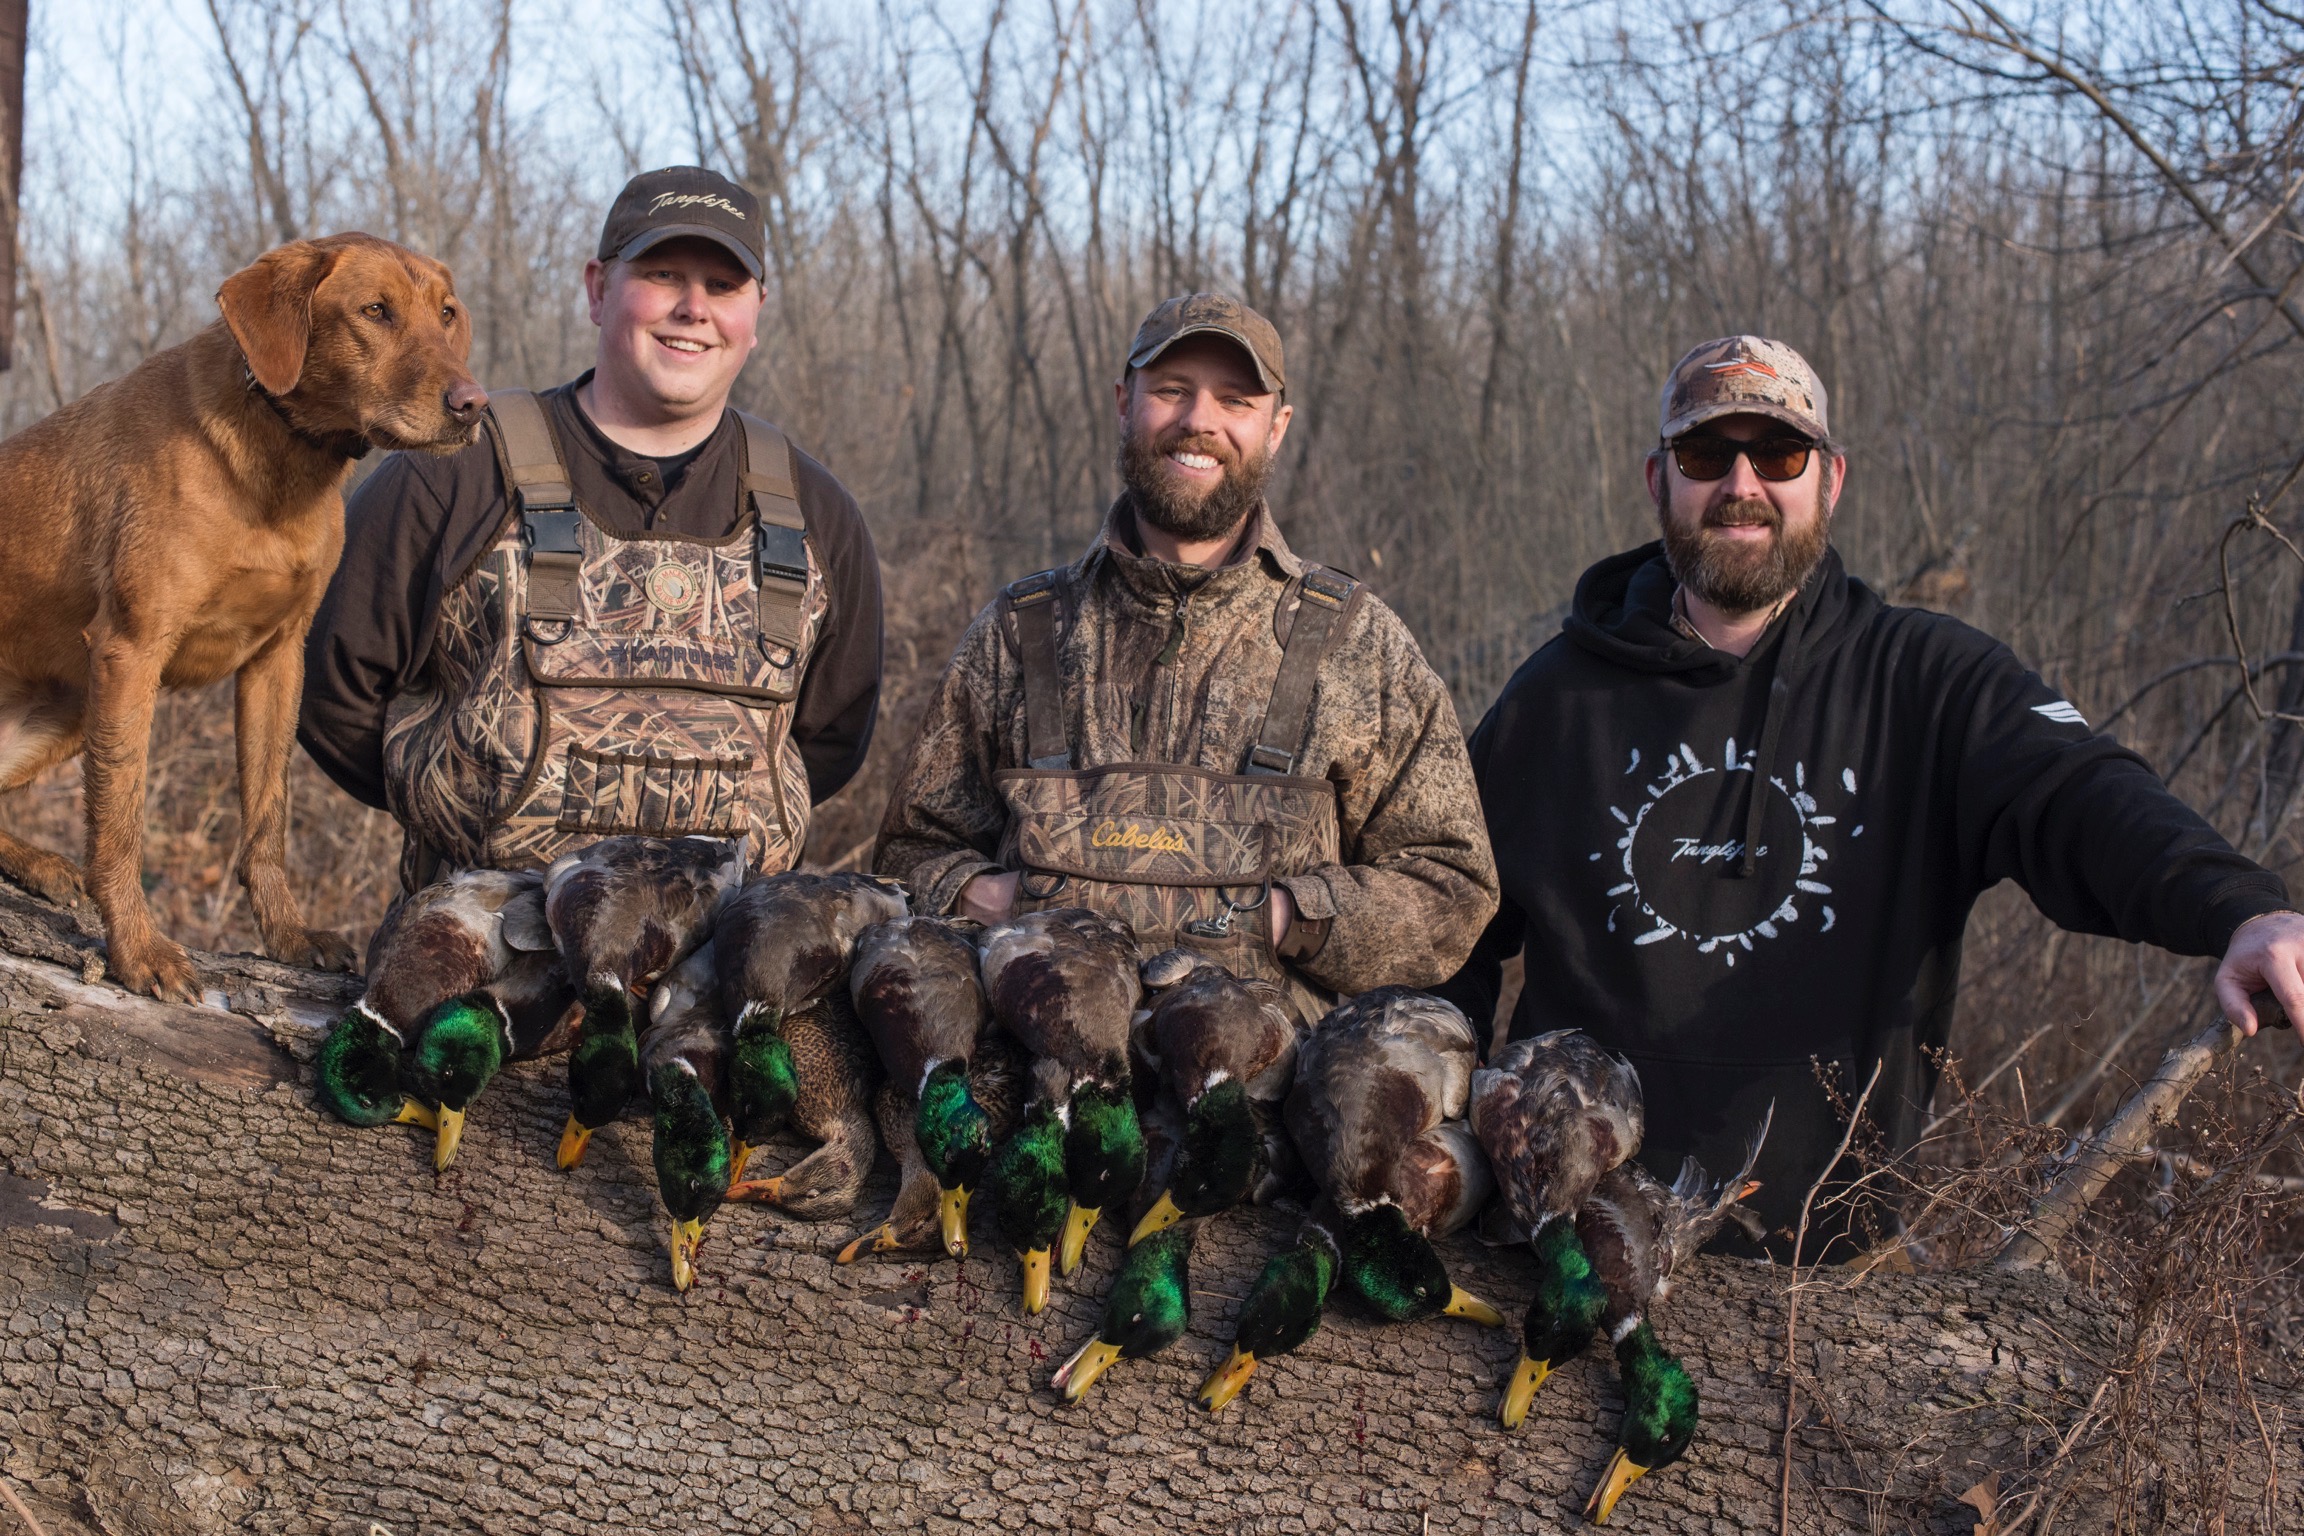 This late-season hunt was a success because the author and his buddies picked off mallards coming in to a flooded field early afternoon, killing greenheads in singles and pairs and educating very few ducks.